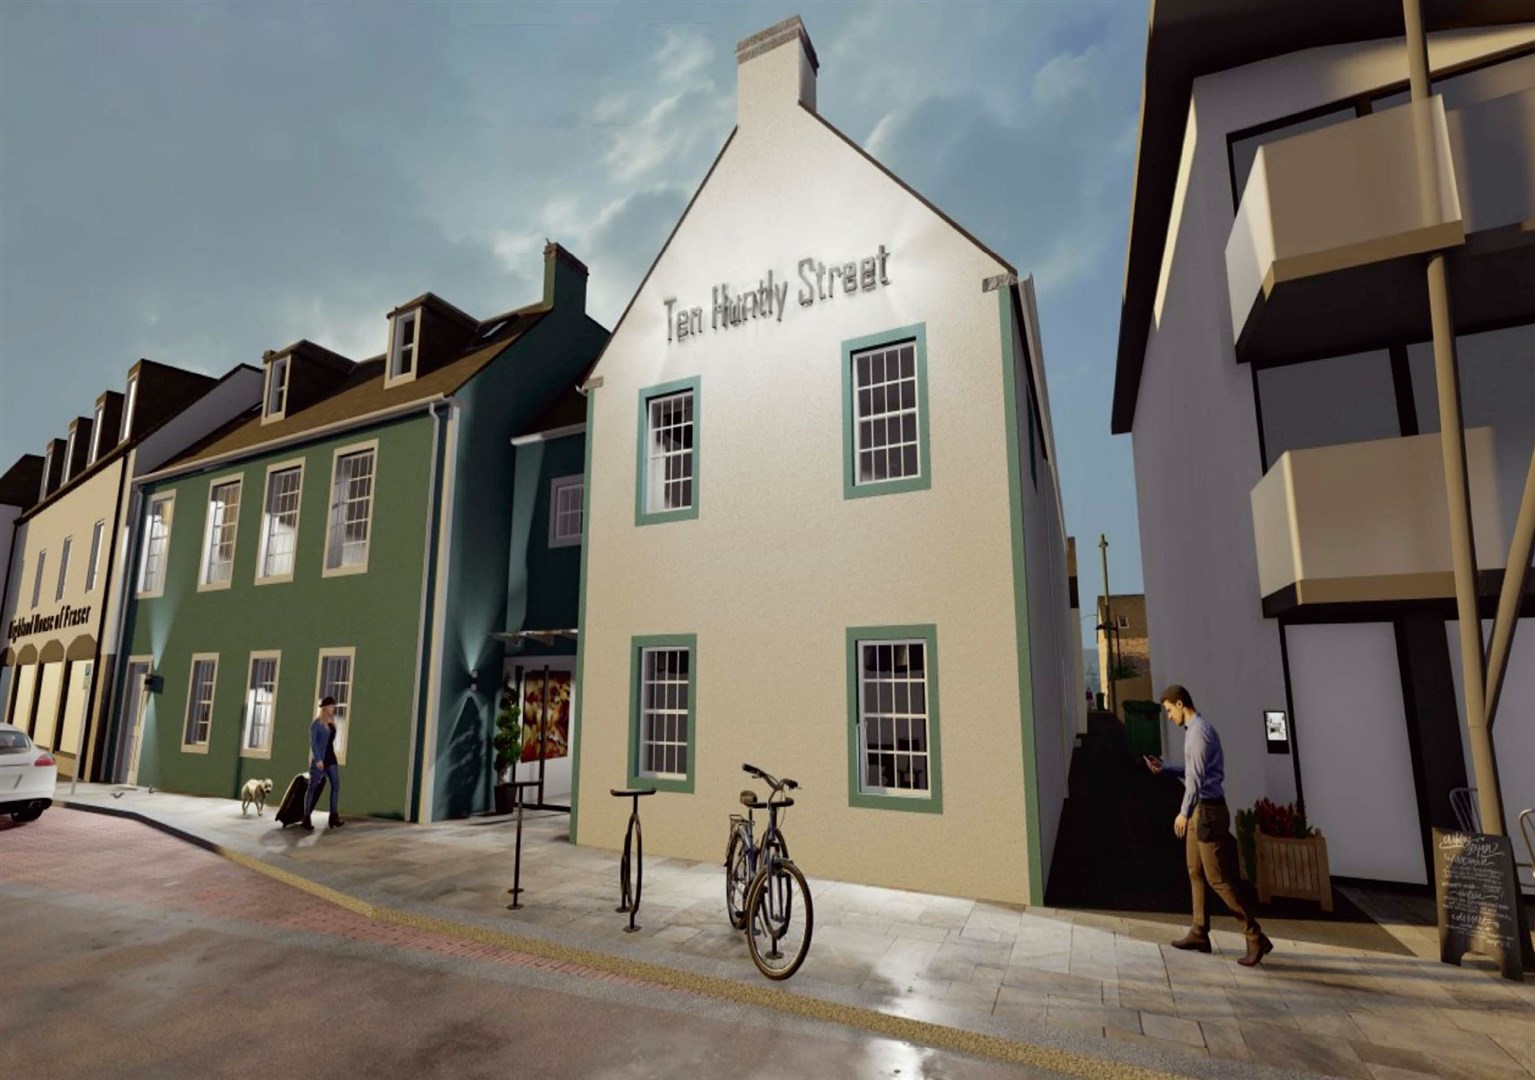 An artist's impression of the proposed transformation of the former British Legion Club into a hotel.